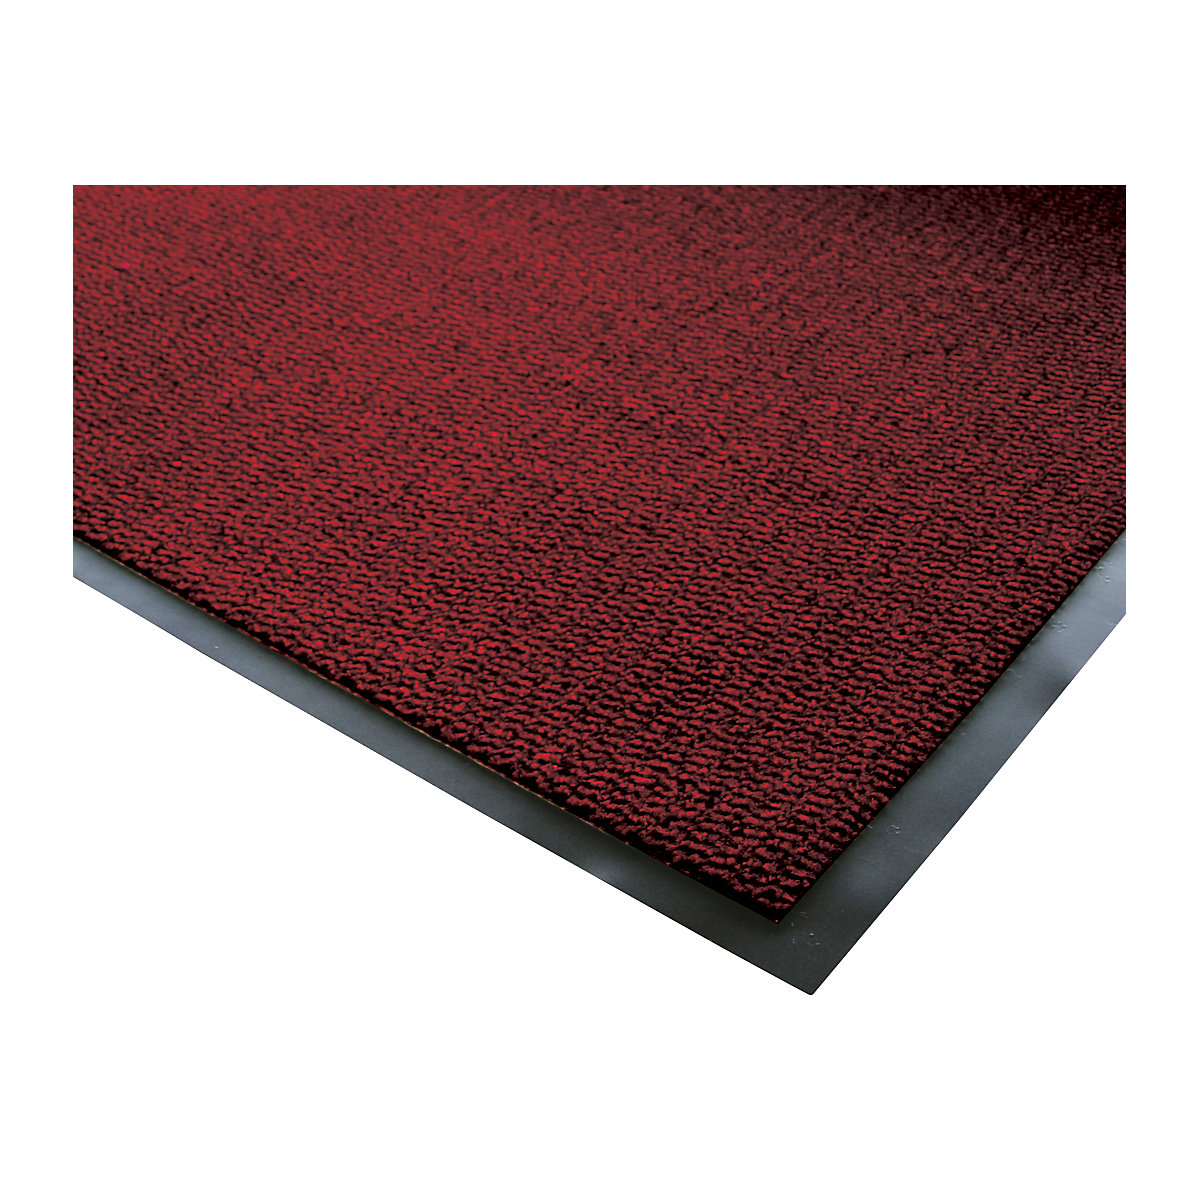 Entrance matting for indoor use, polypropylene pile, width 900 mm, sold by the metre, black / red